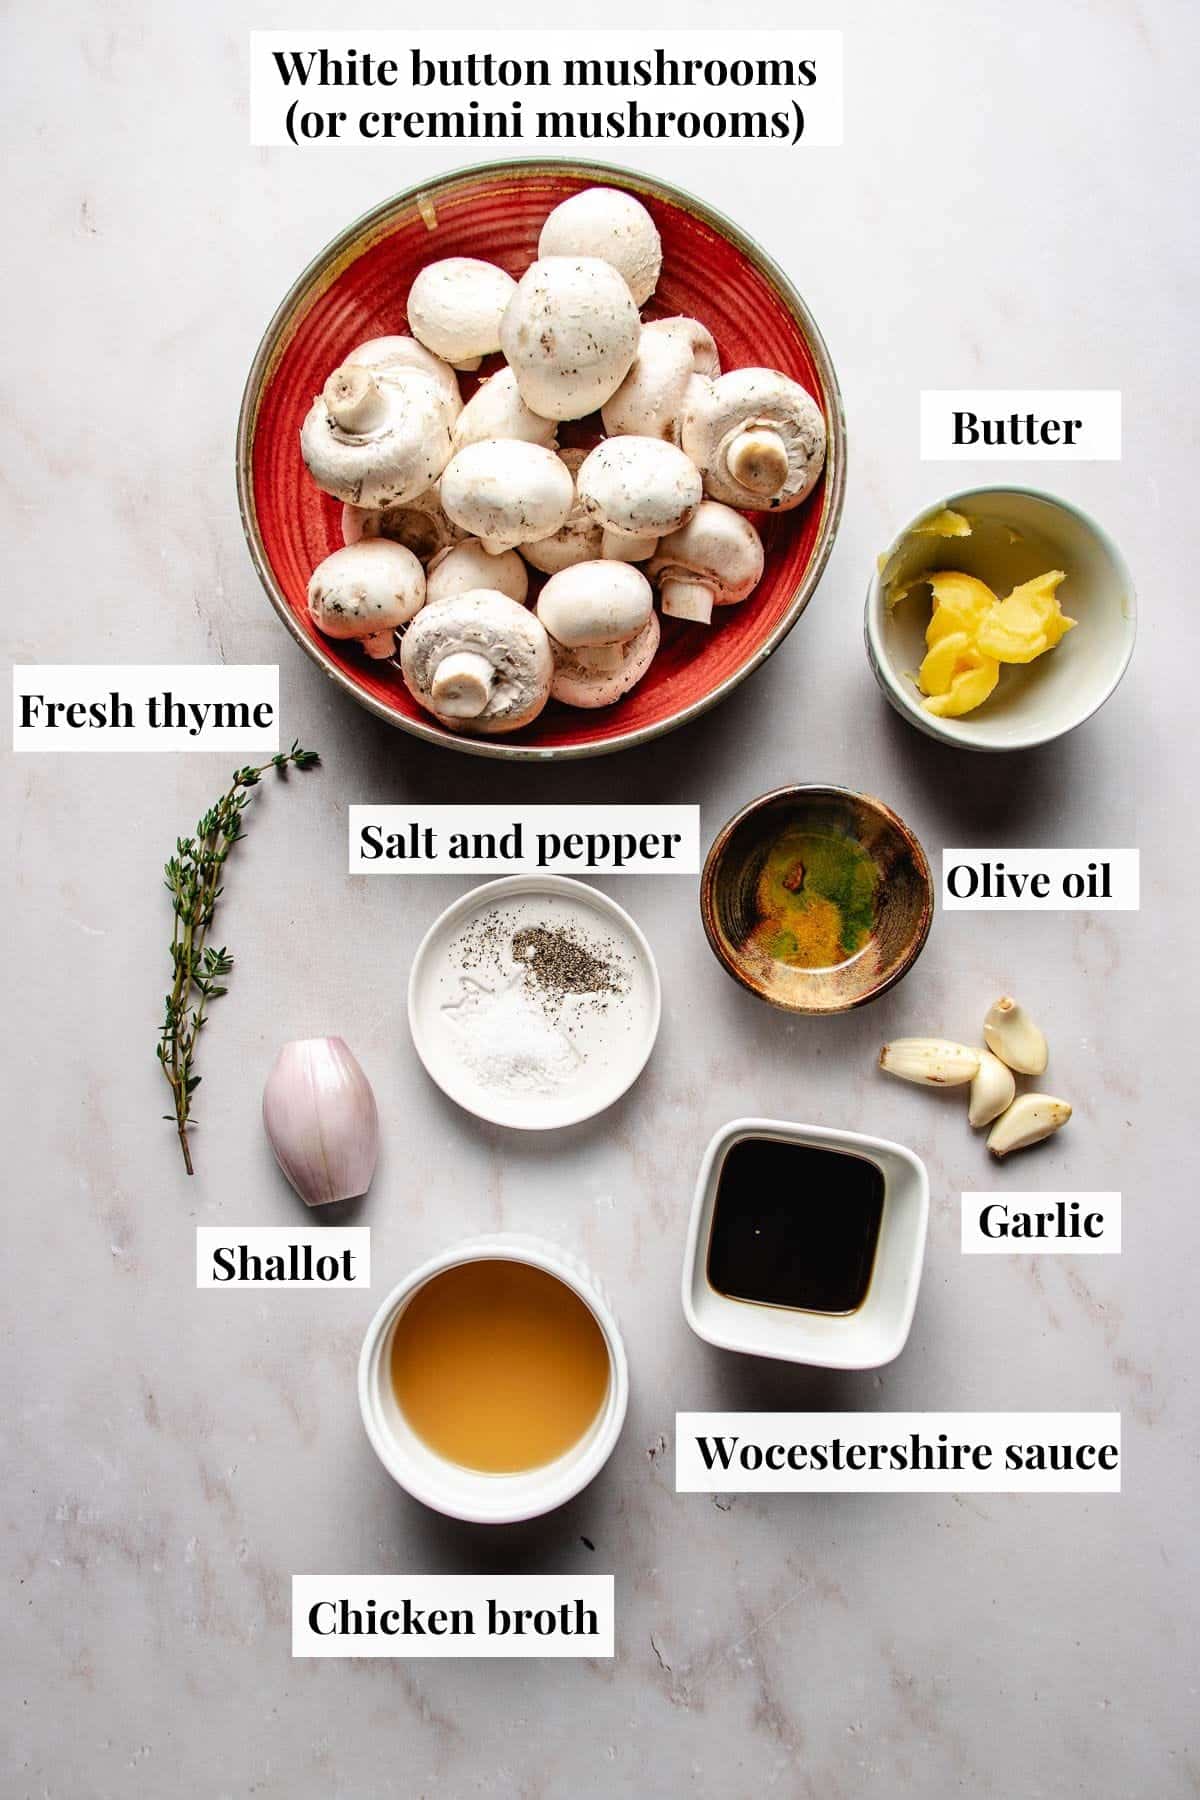 Ingredients used to make steakhouse style sauteed mushrooms.